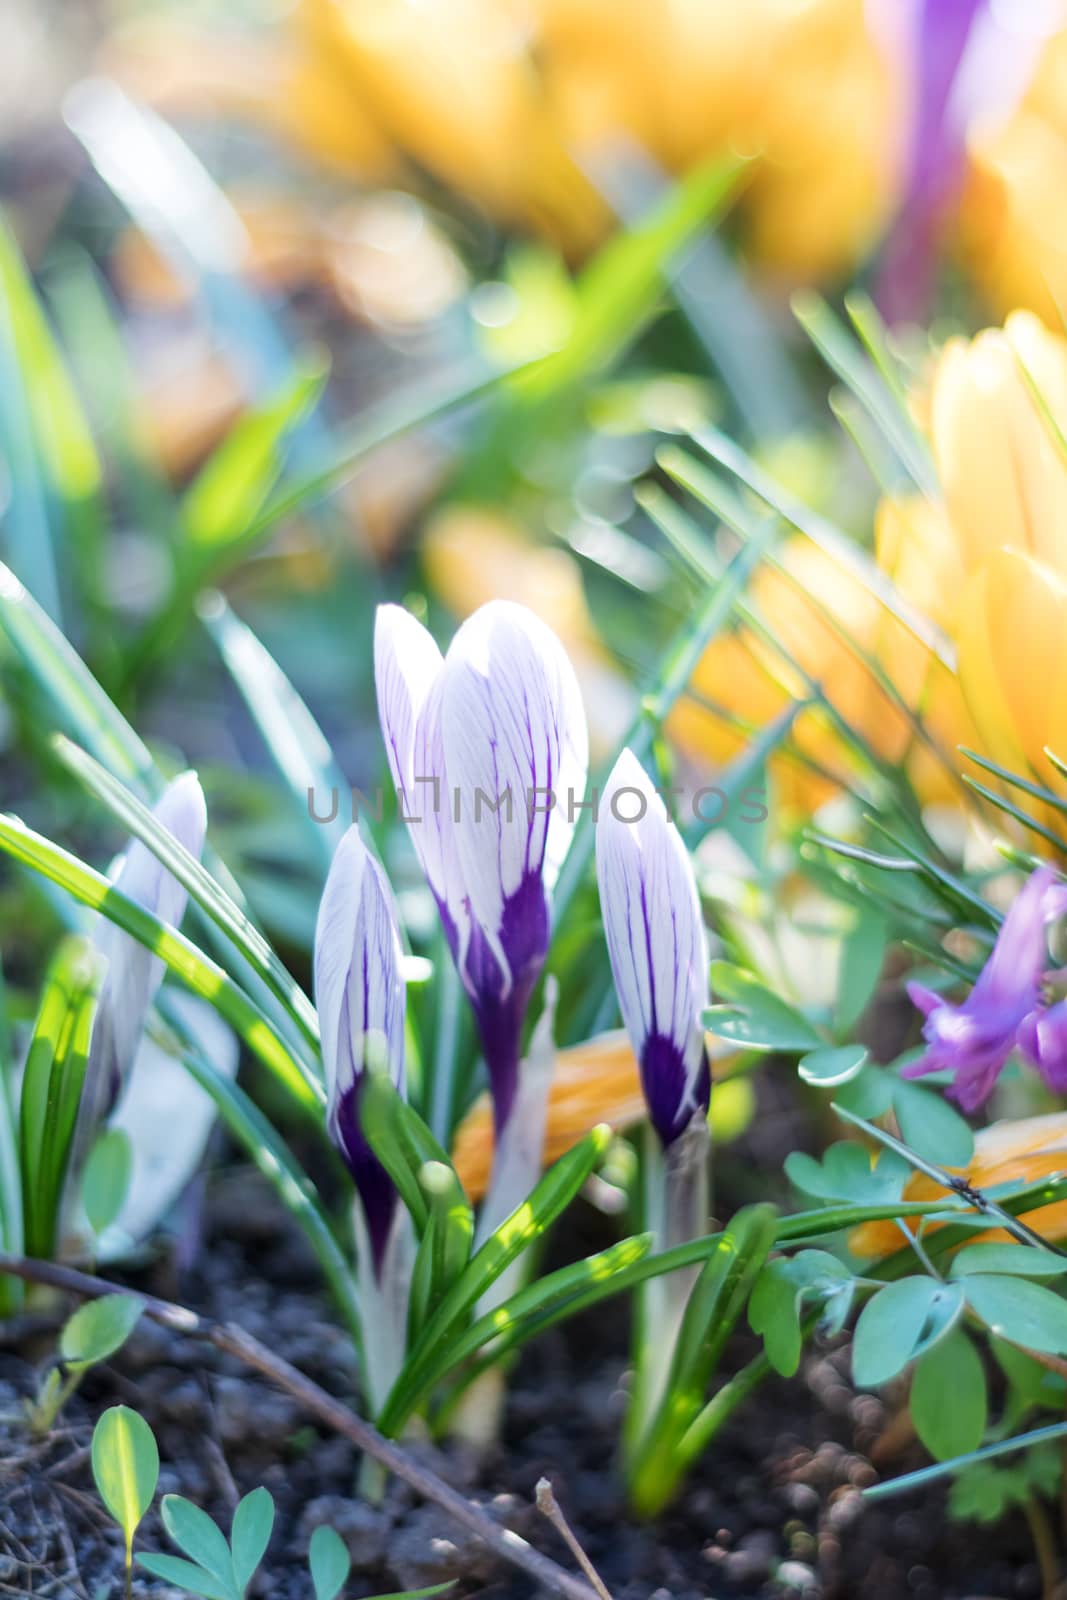 Beautiful spring violet white and yellow flowers crocuses on bokeh background in sunny spring forest under sunbeams. Holidays Easter, valentine, mothers day picture with copy space. Toned.